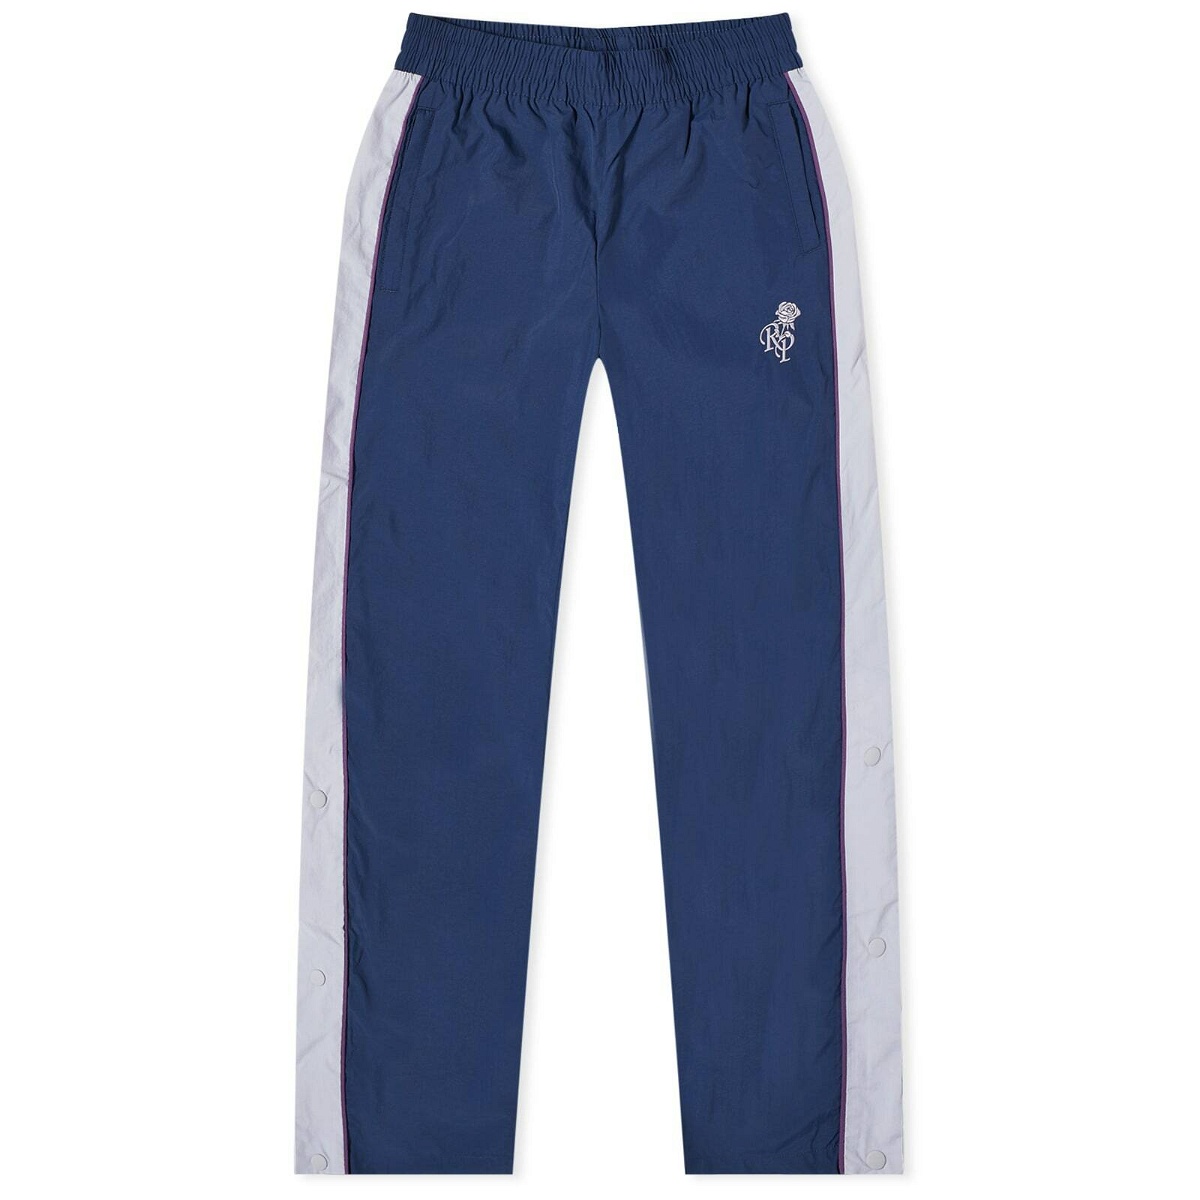 New Balance x Rich Paul Track Pant in Navy New Balance